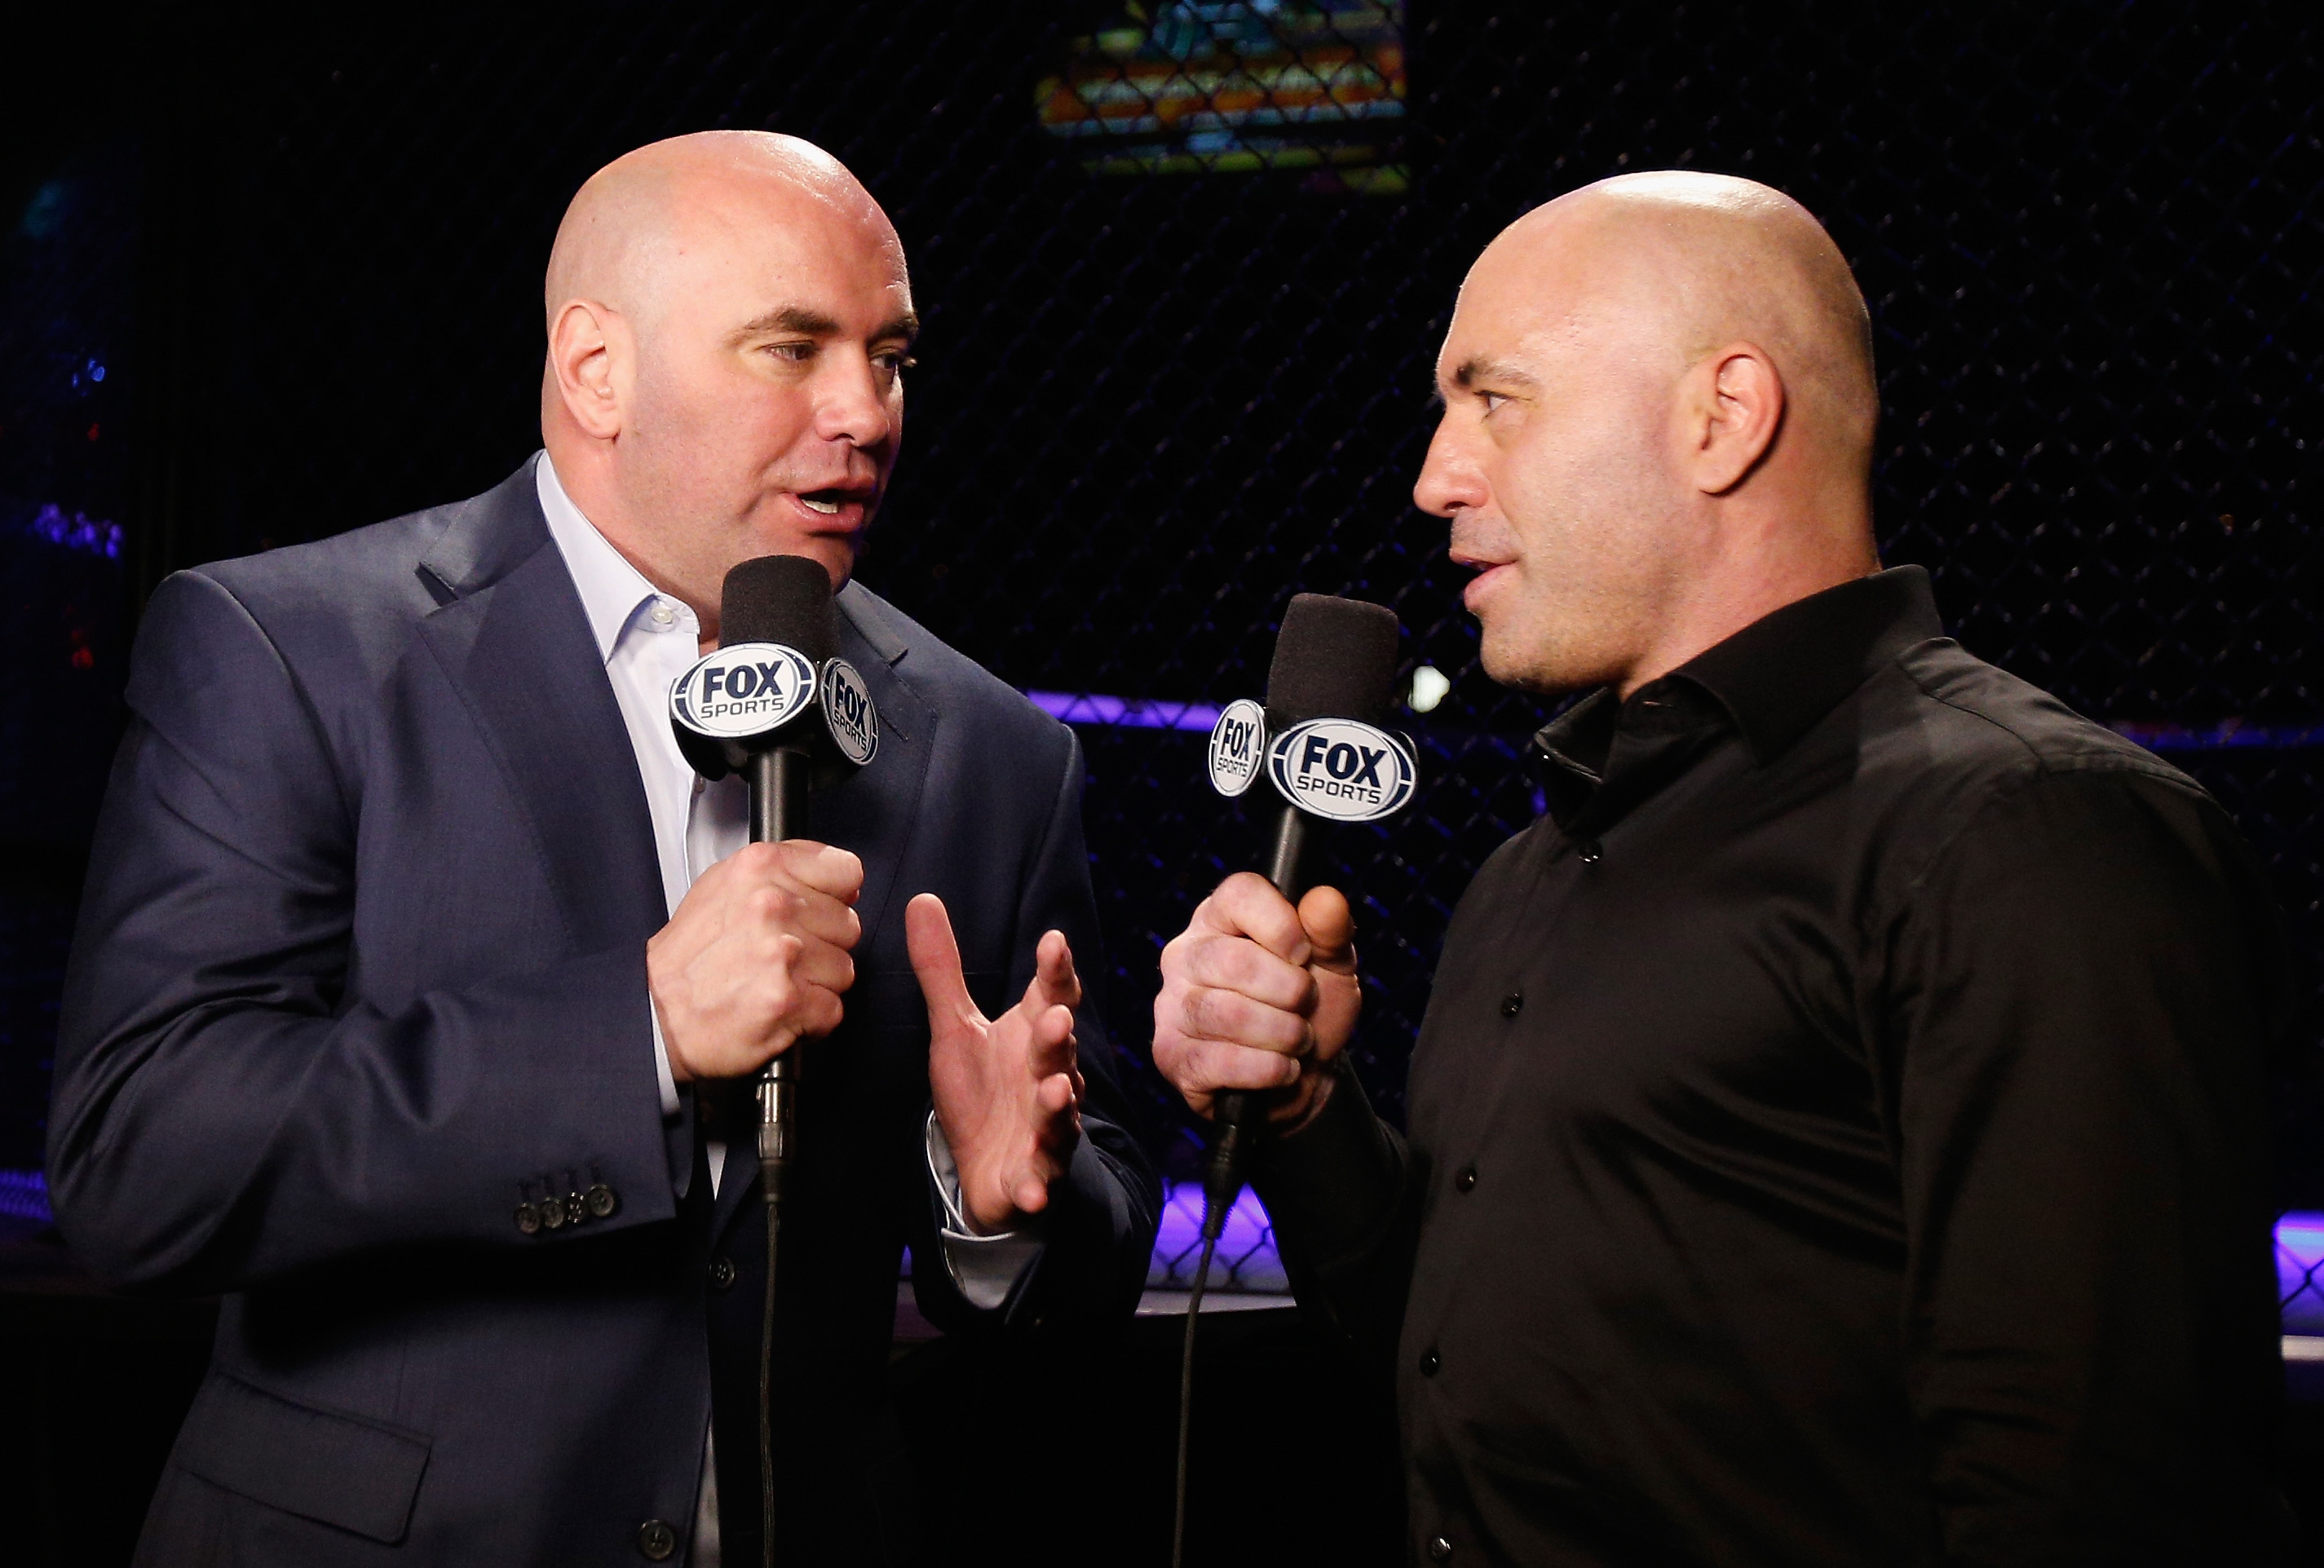 Dana White and Joe Rogan during the UFC 181 broadcast in 2014. 